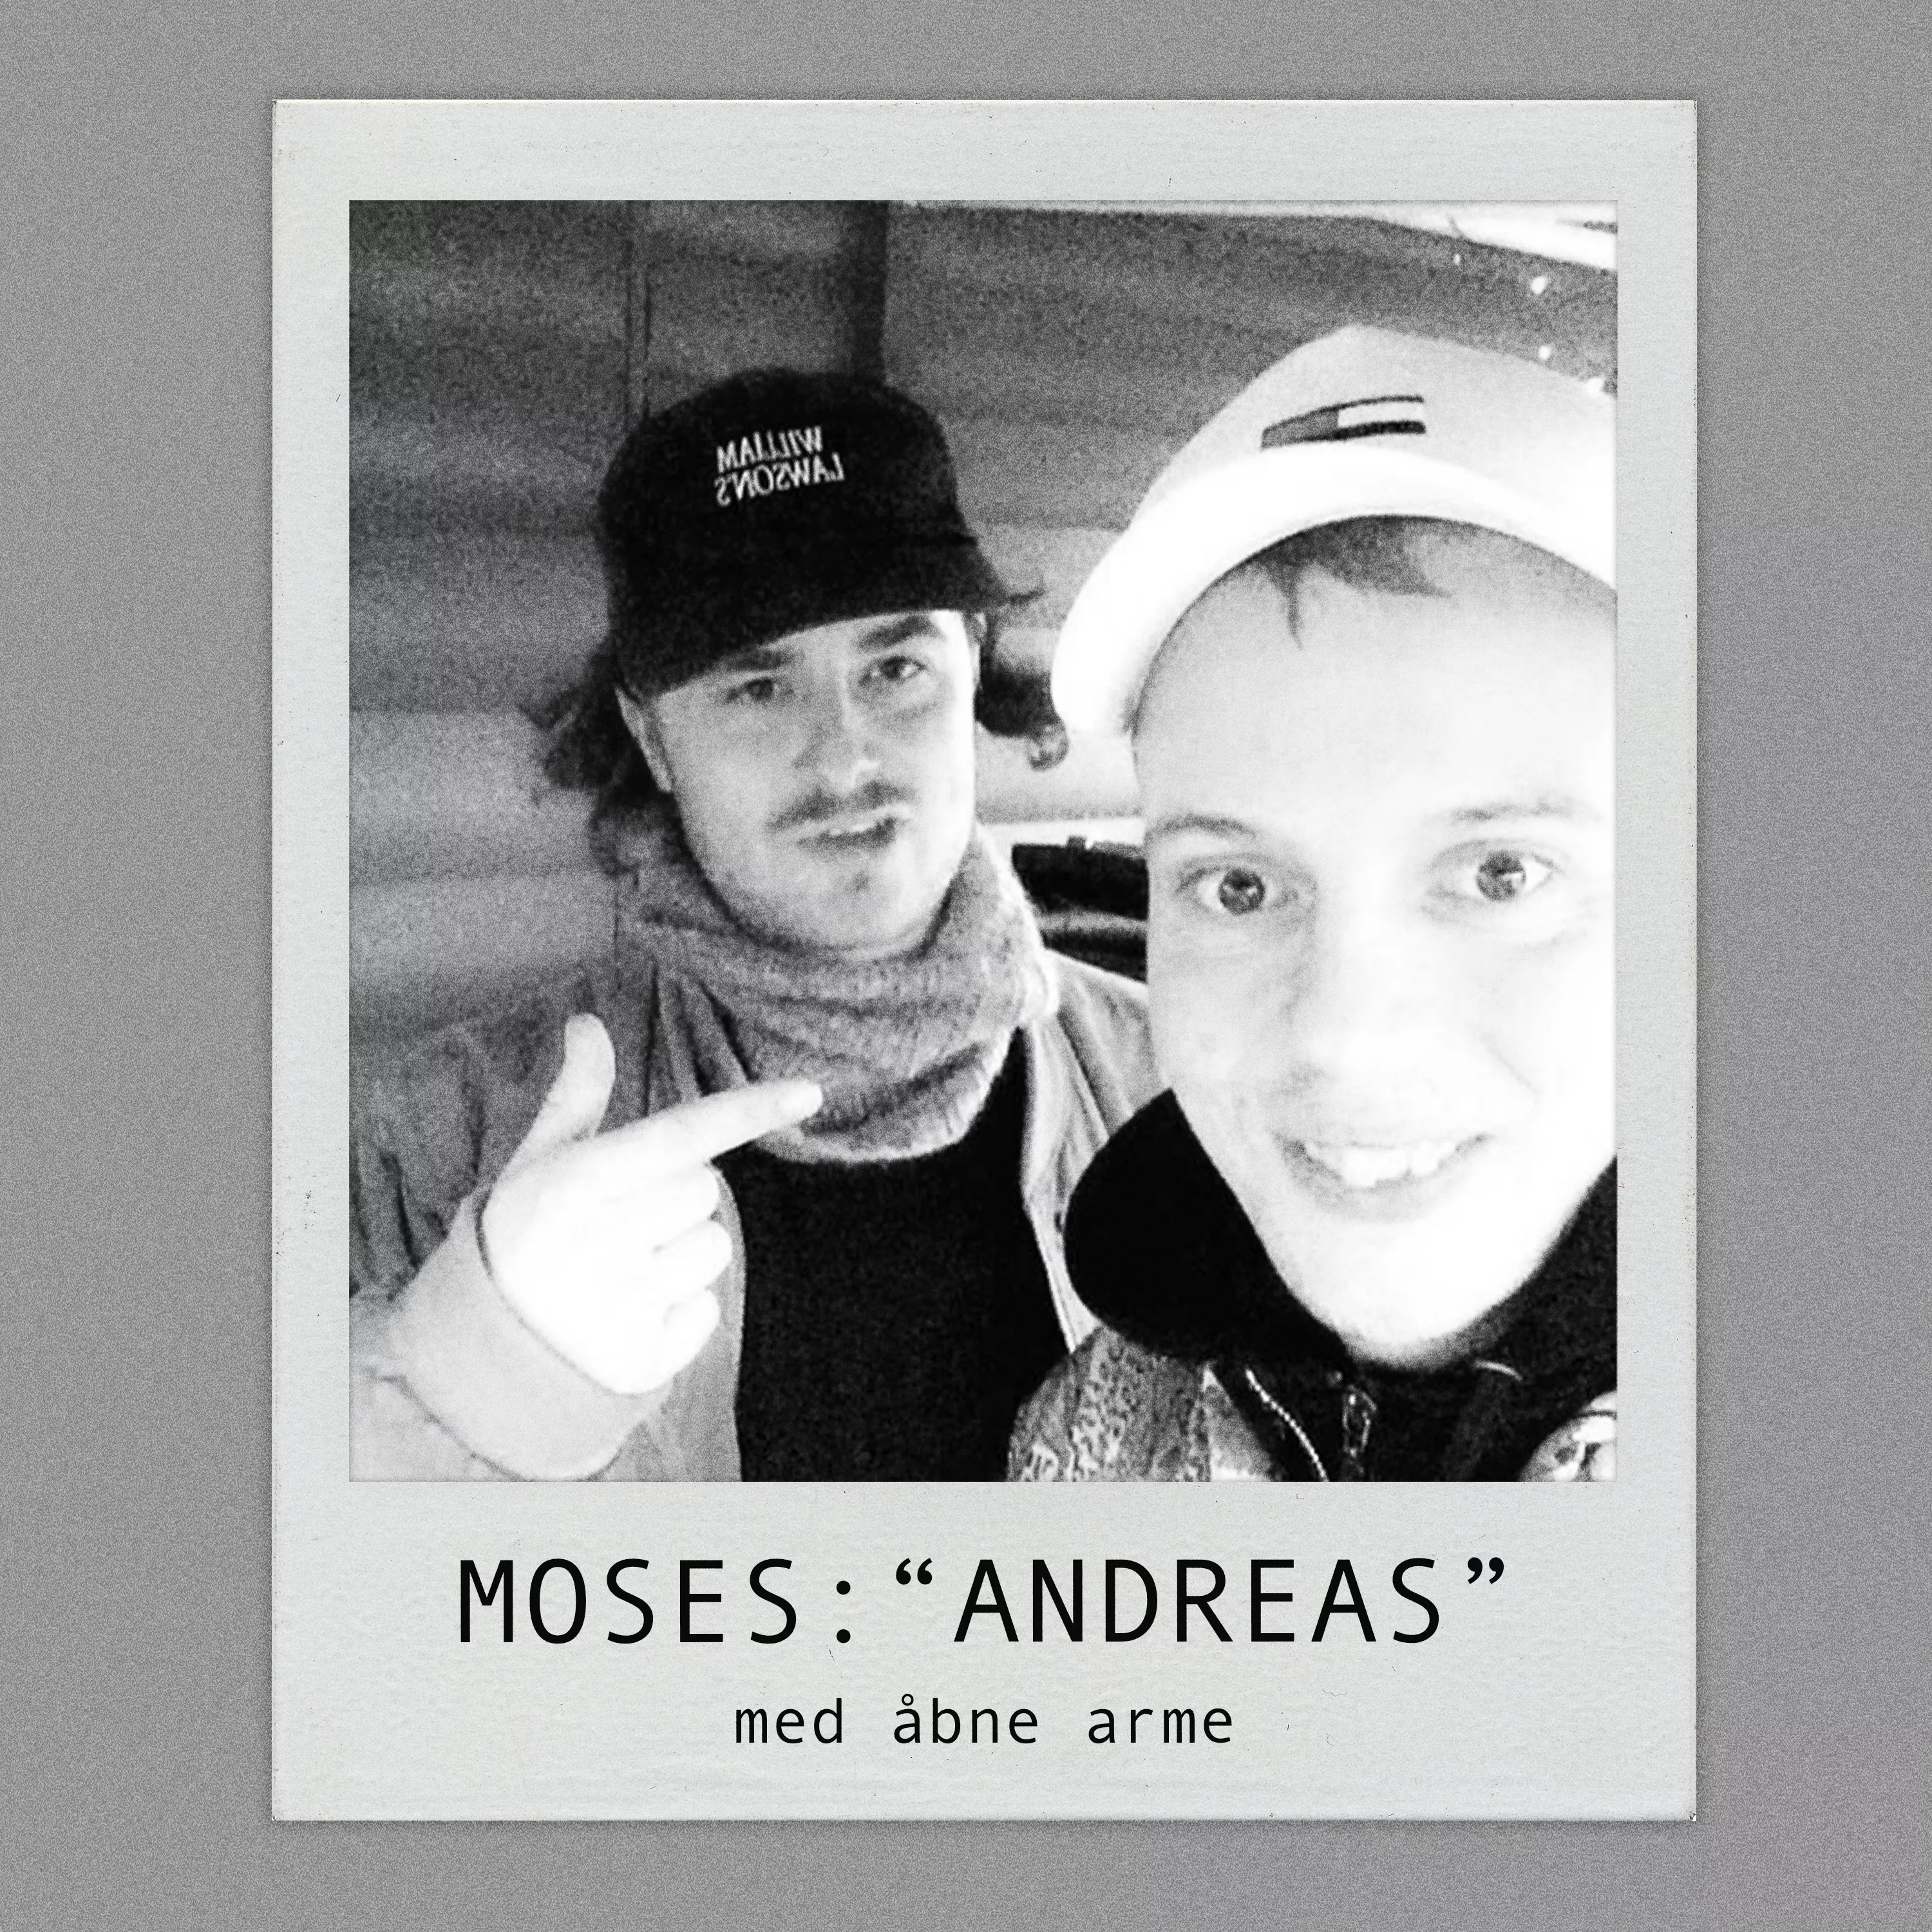 Med Åbne Arme - Moses: "Andreas"